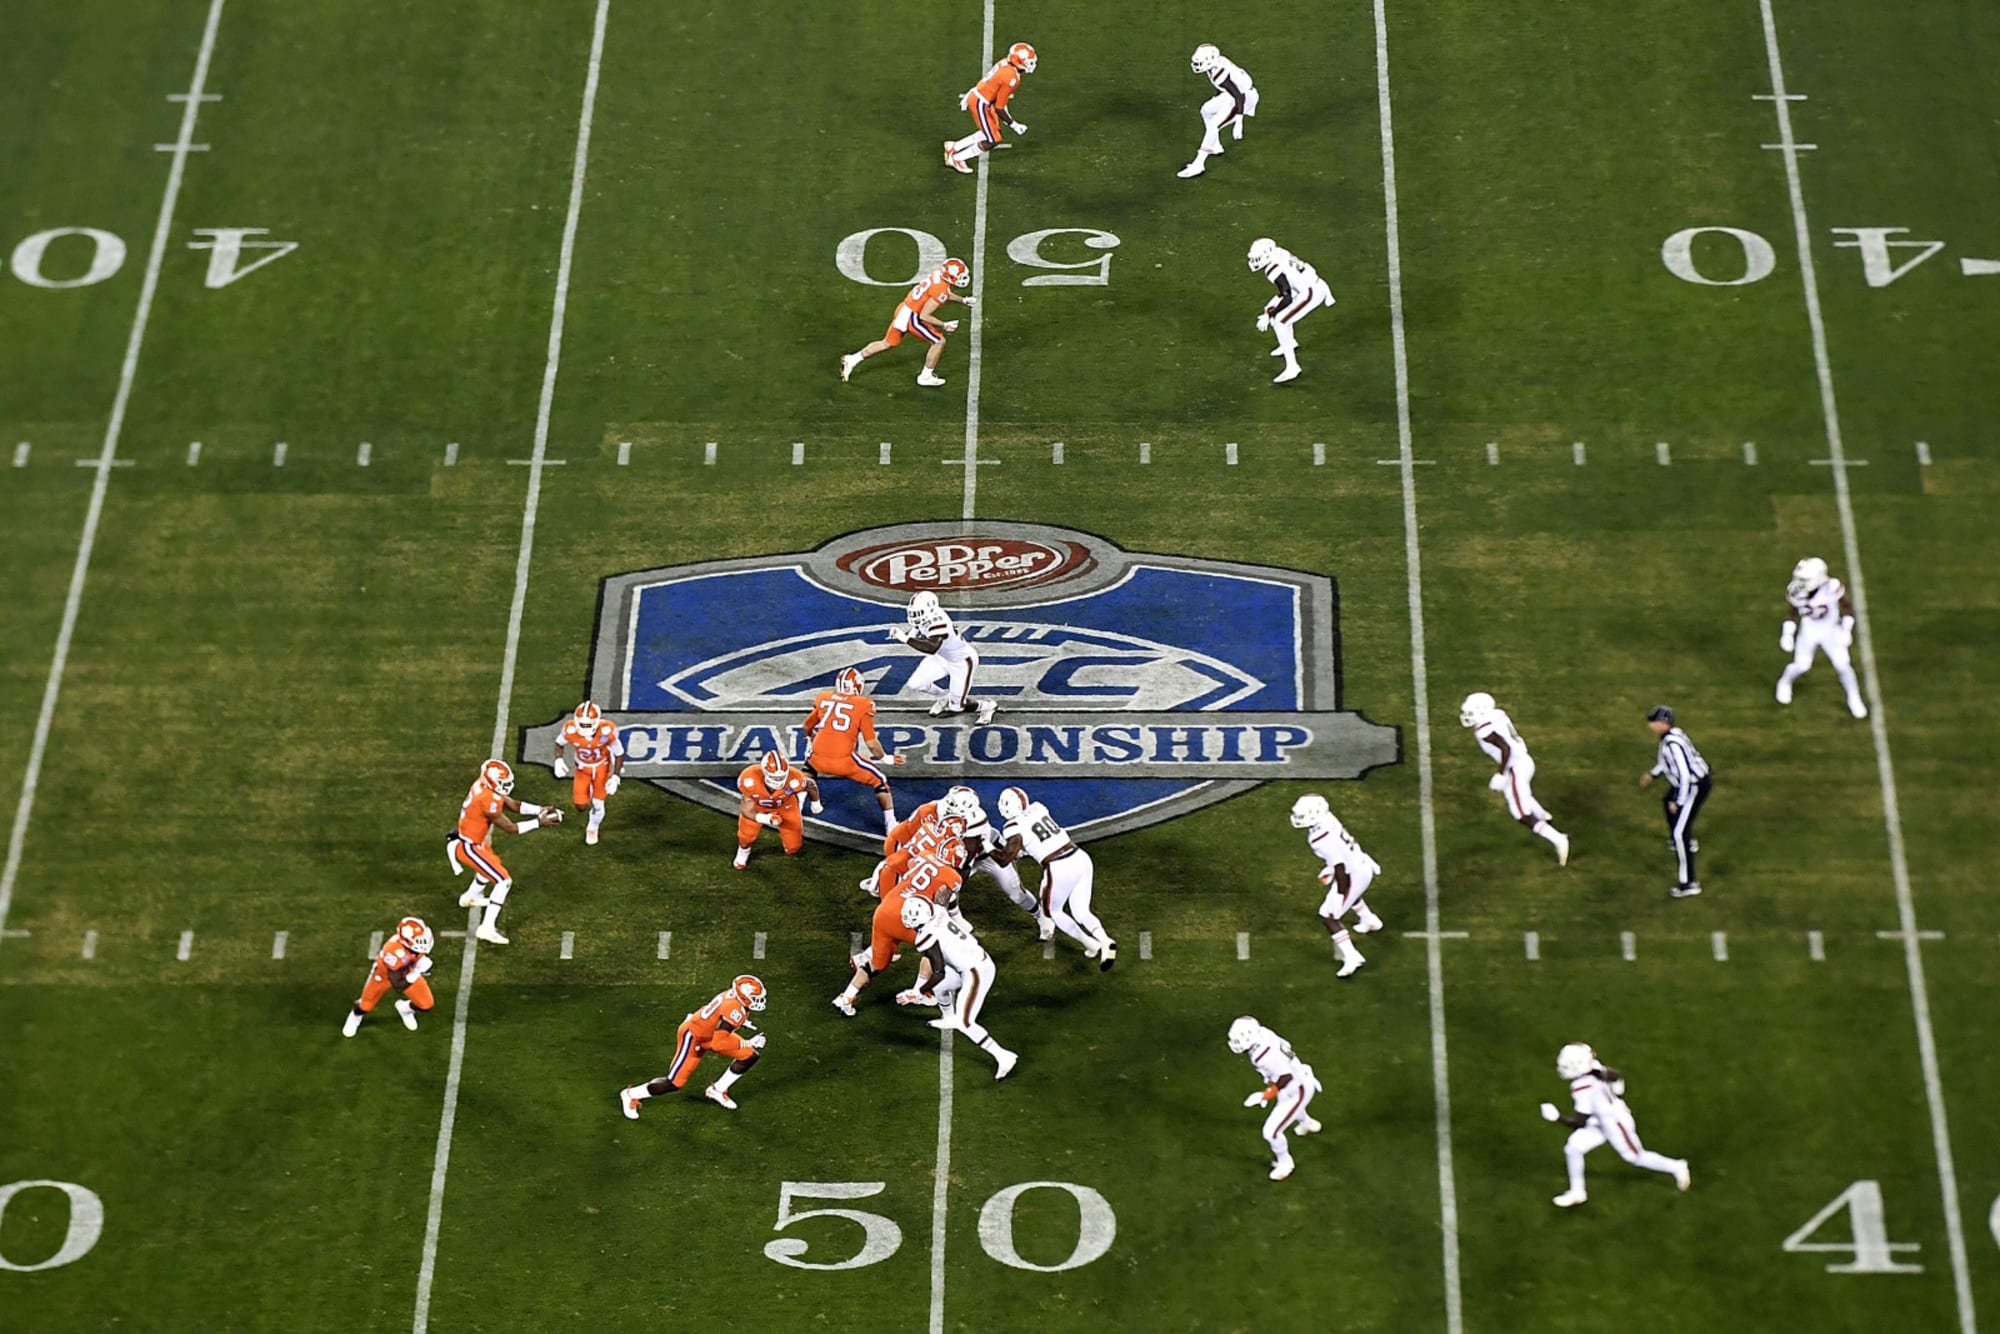 Altered Miami football schedule released by ACC includes Clemson